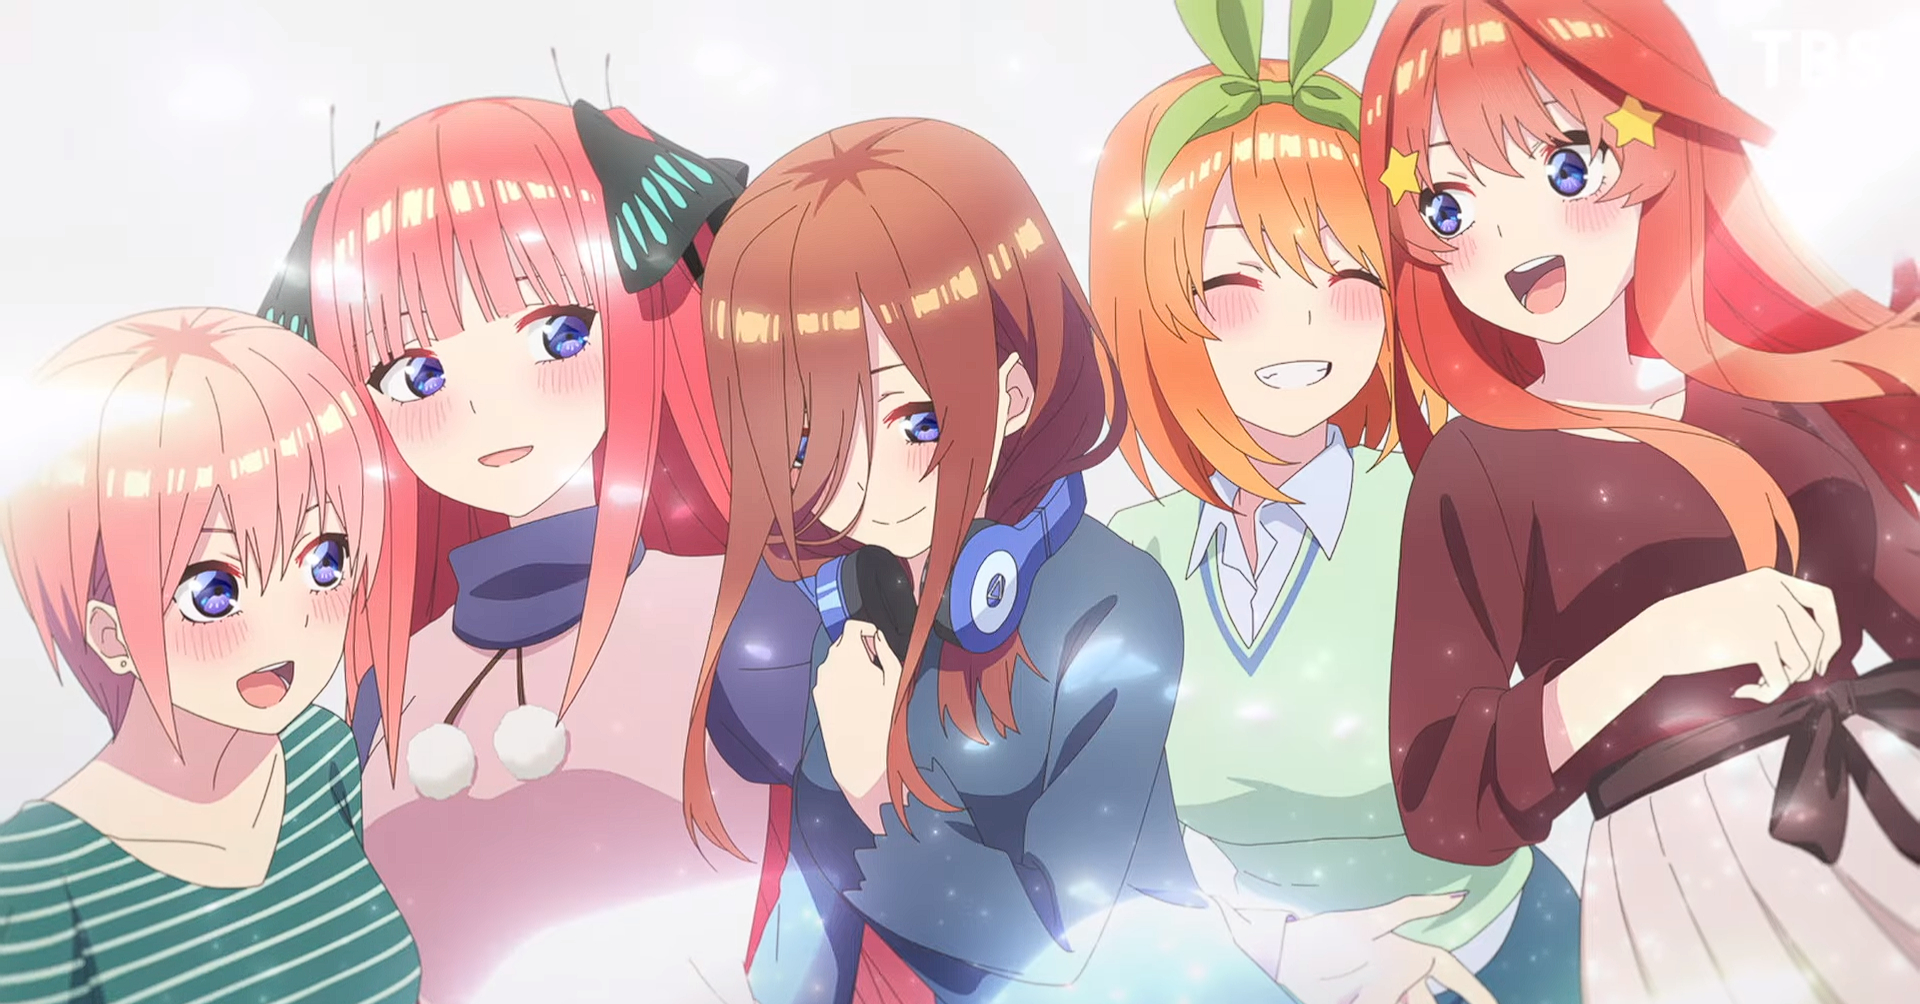 Miku Nakano Trailer Released For The Quintessential Quintuplets Season 2 -  Anime Corner